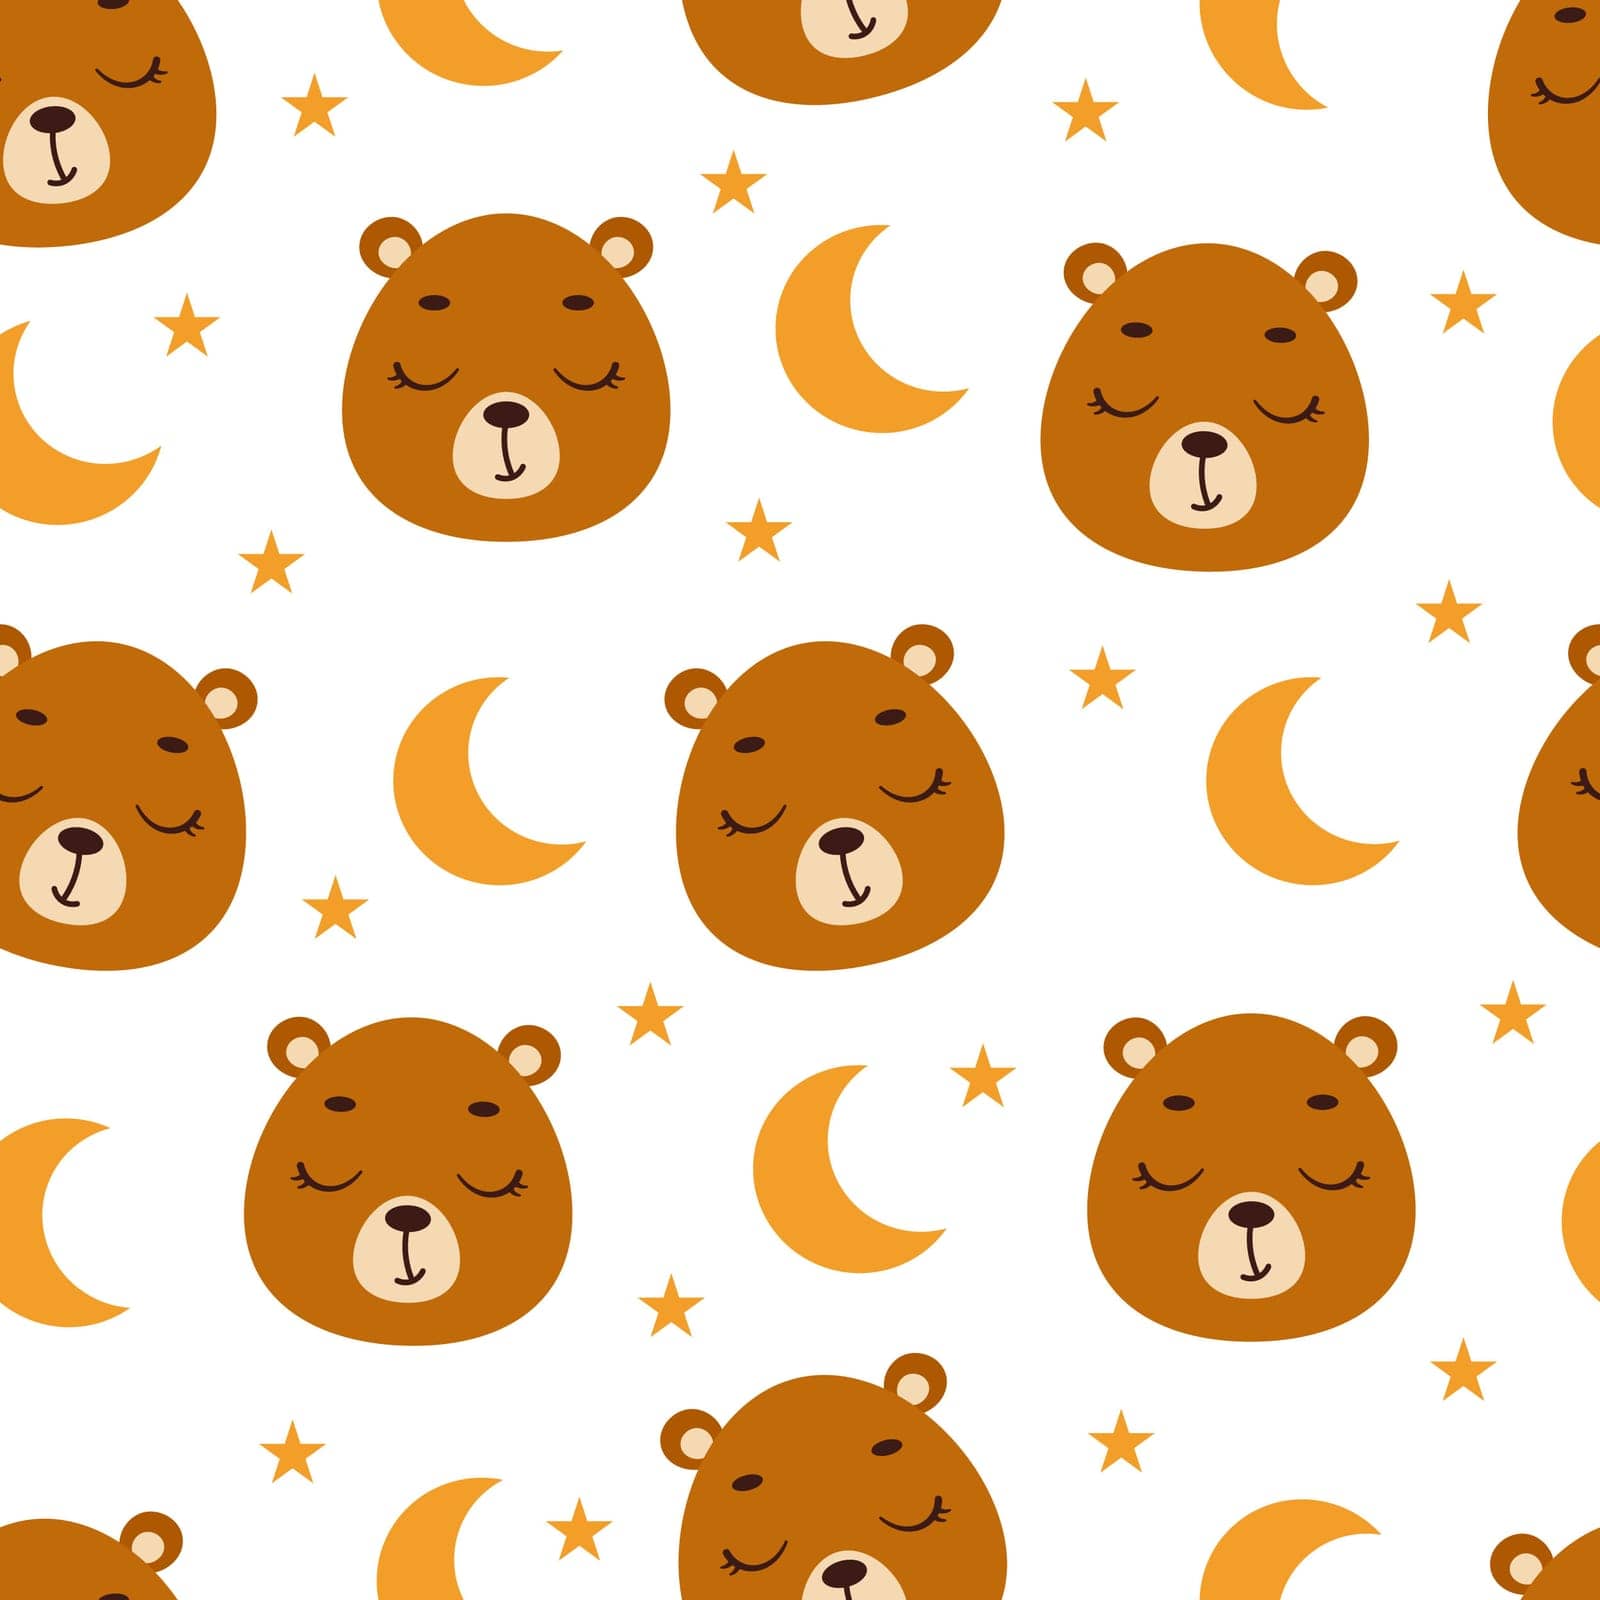 Cute little slipping bear head seamless childish pattern. Funny cartoon animal character for fabric, wrapping, textile, wallpaper, apparel. Vector illustration